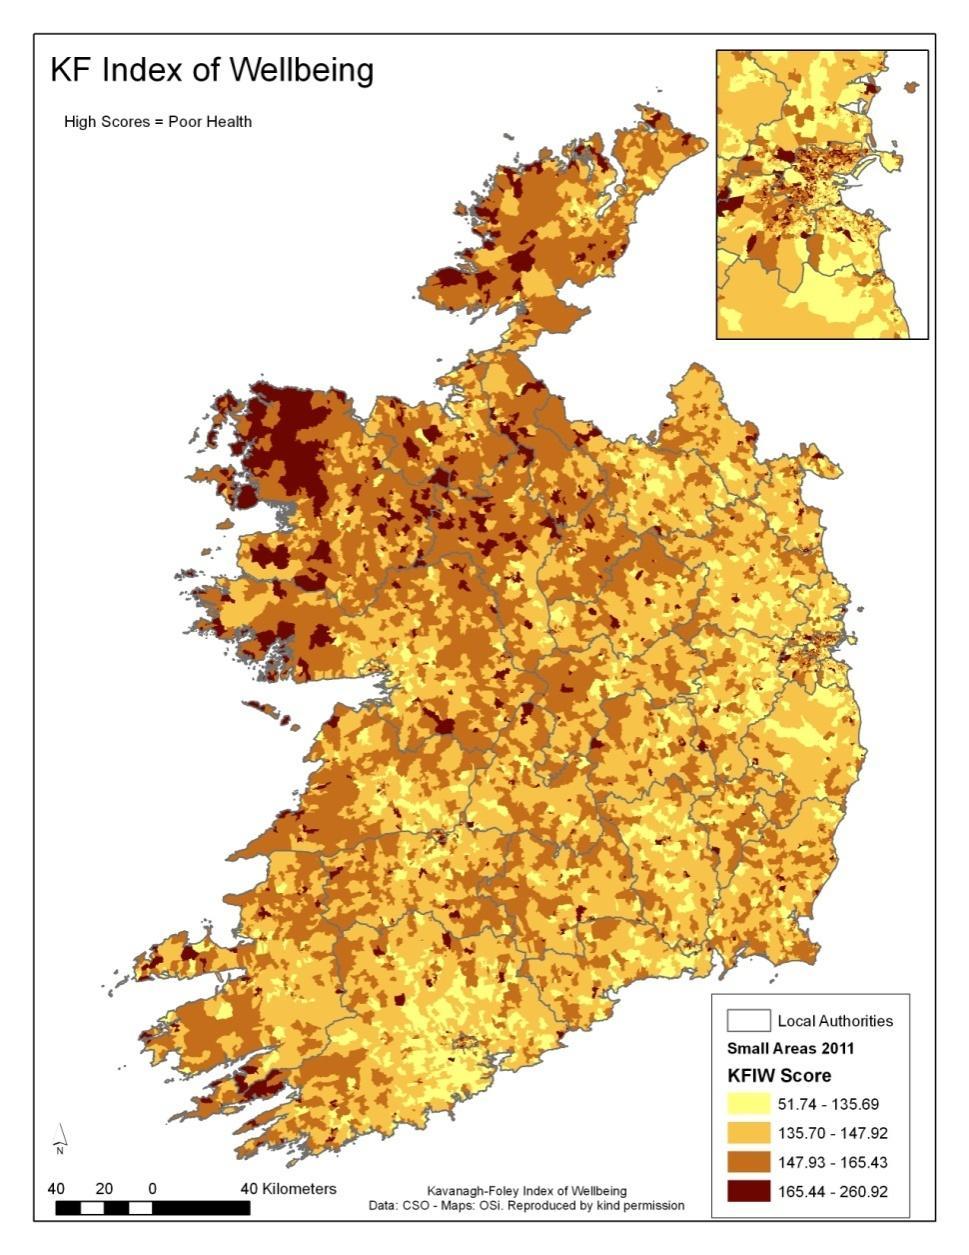 Census 2011 By-products Kavanagh-Foley Index of Wellbeing Uses data from new general health question Score calculated by weighting % answering each of 5 categories Lowest weighting of 1 given to % in